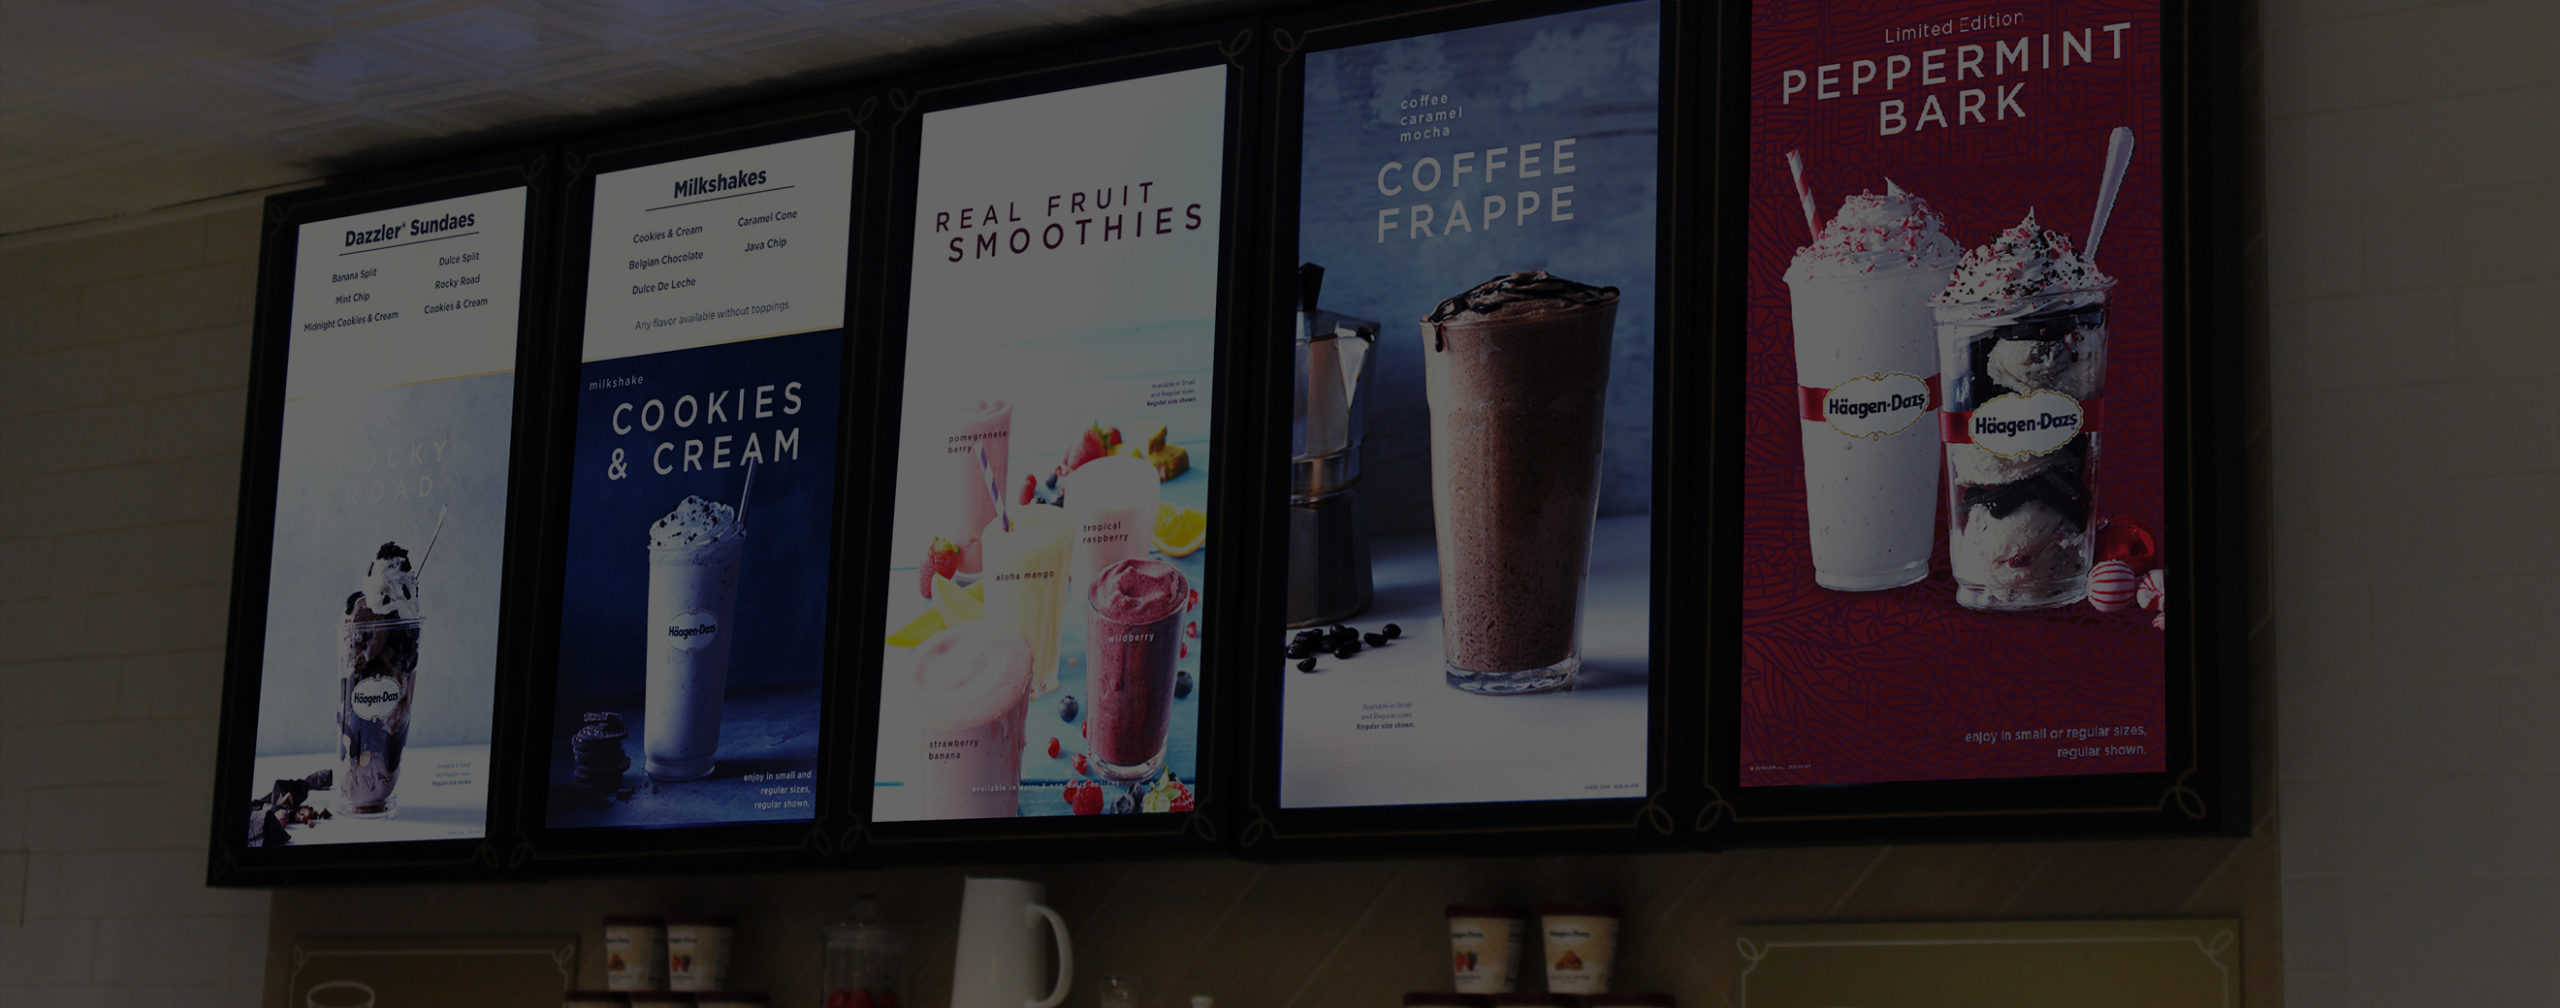 Five vertical digital menu boards displaying a restaurant's coffee, ice cream, and smoothie offerings.							